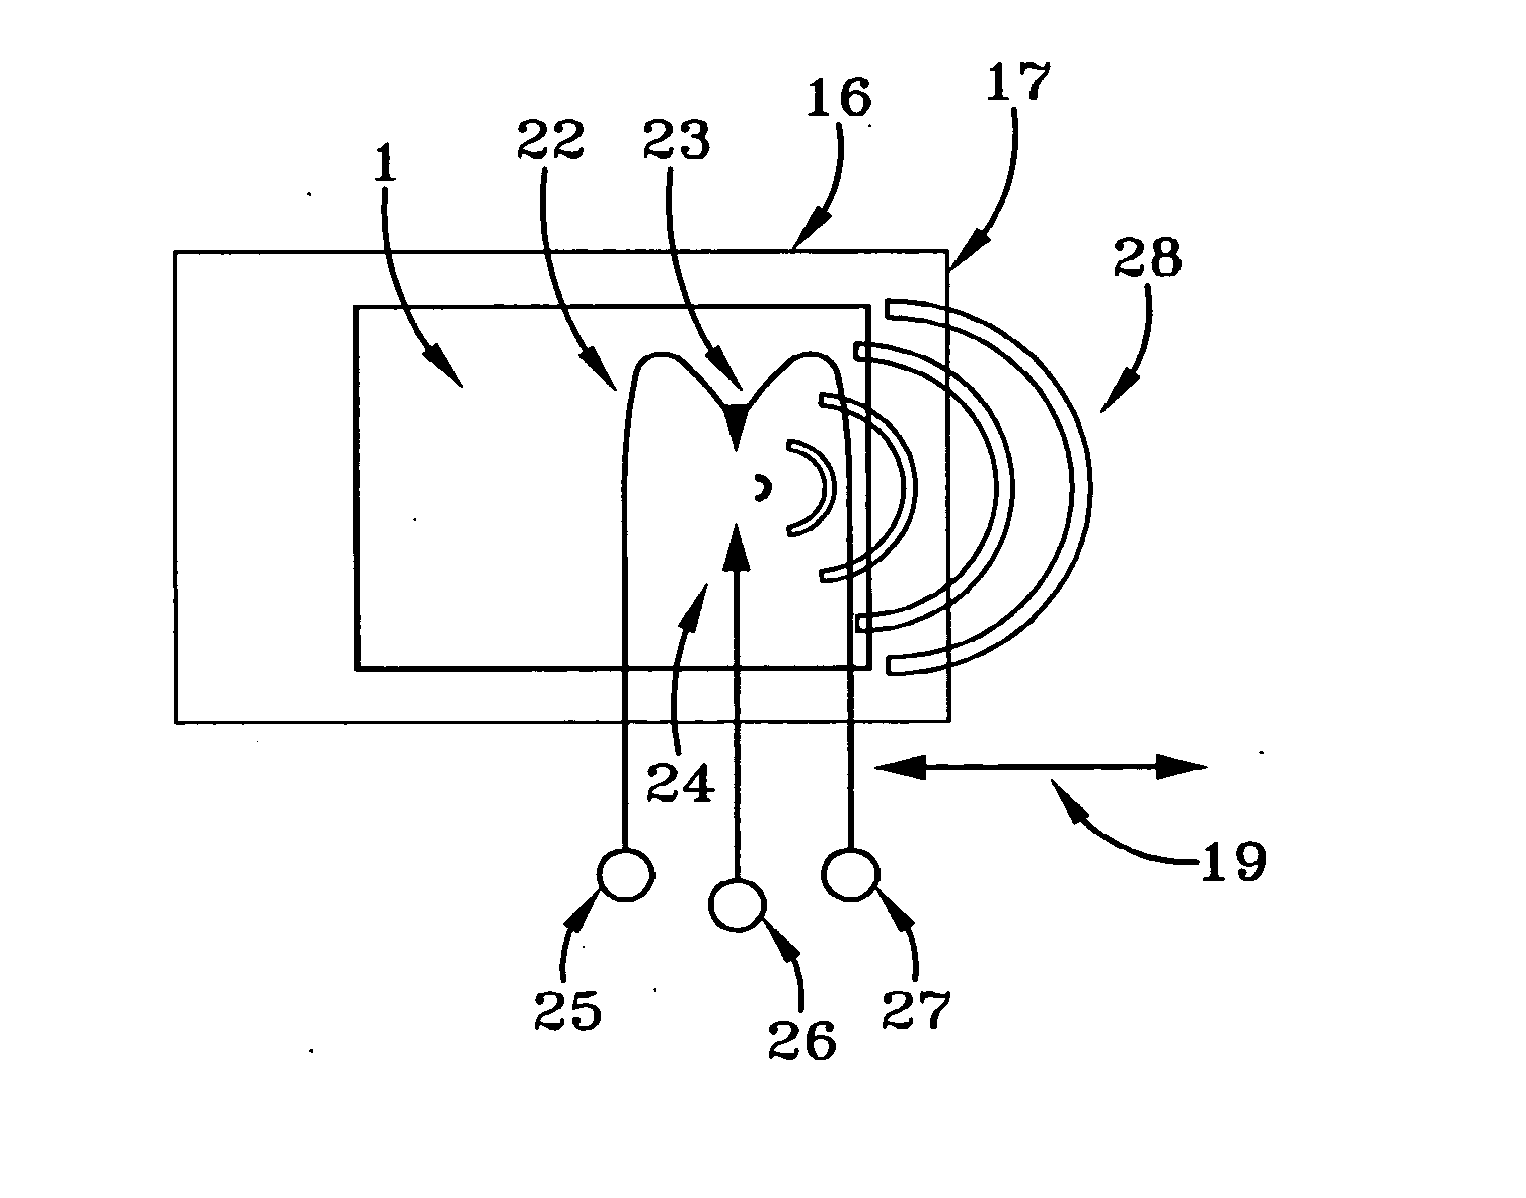 Method of acoustic shock wave treatments for complications associated with surgical mesh implants